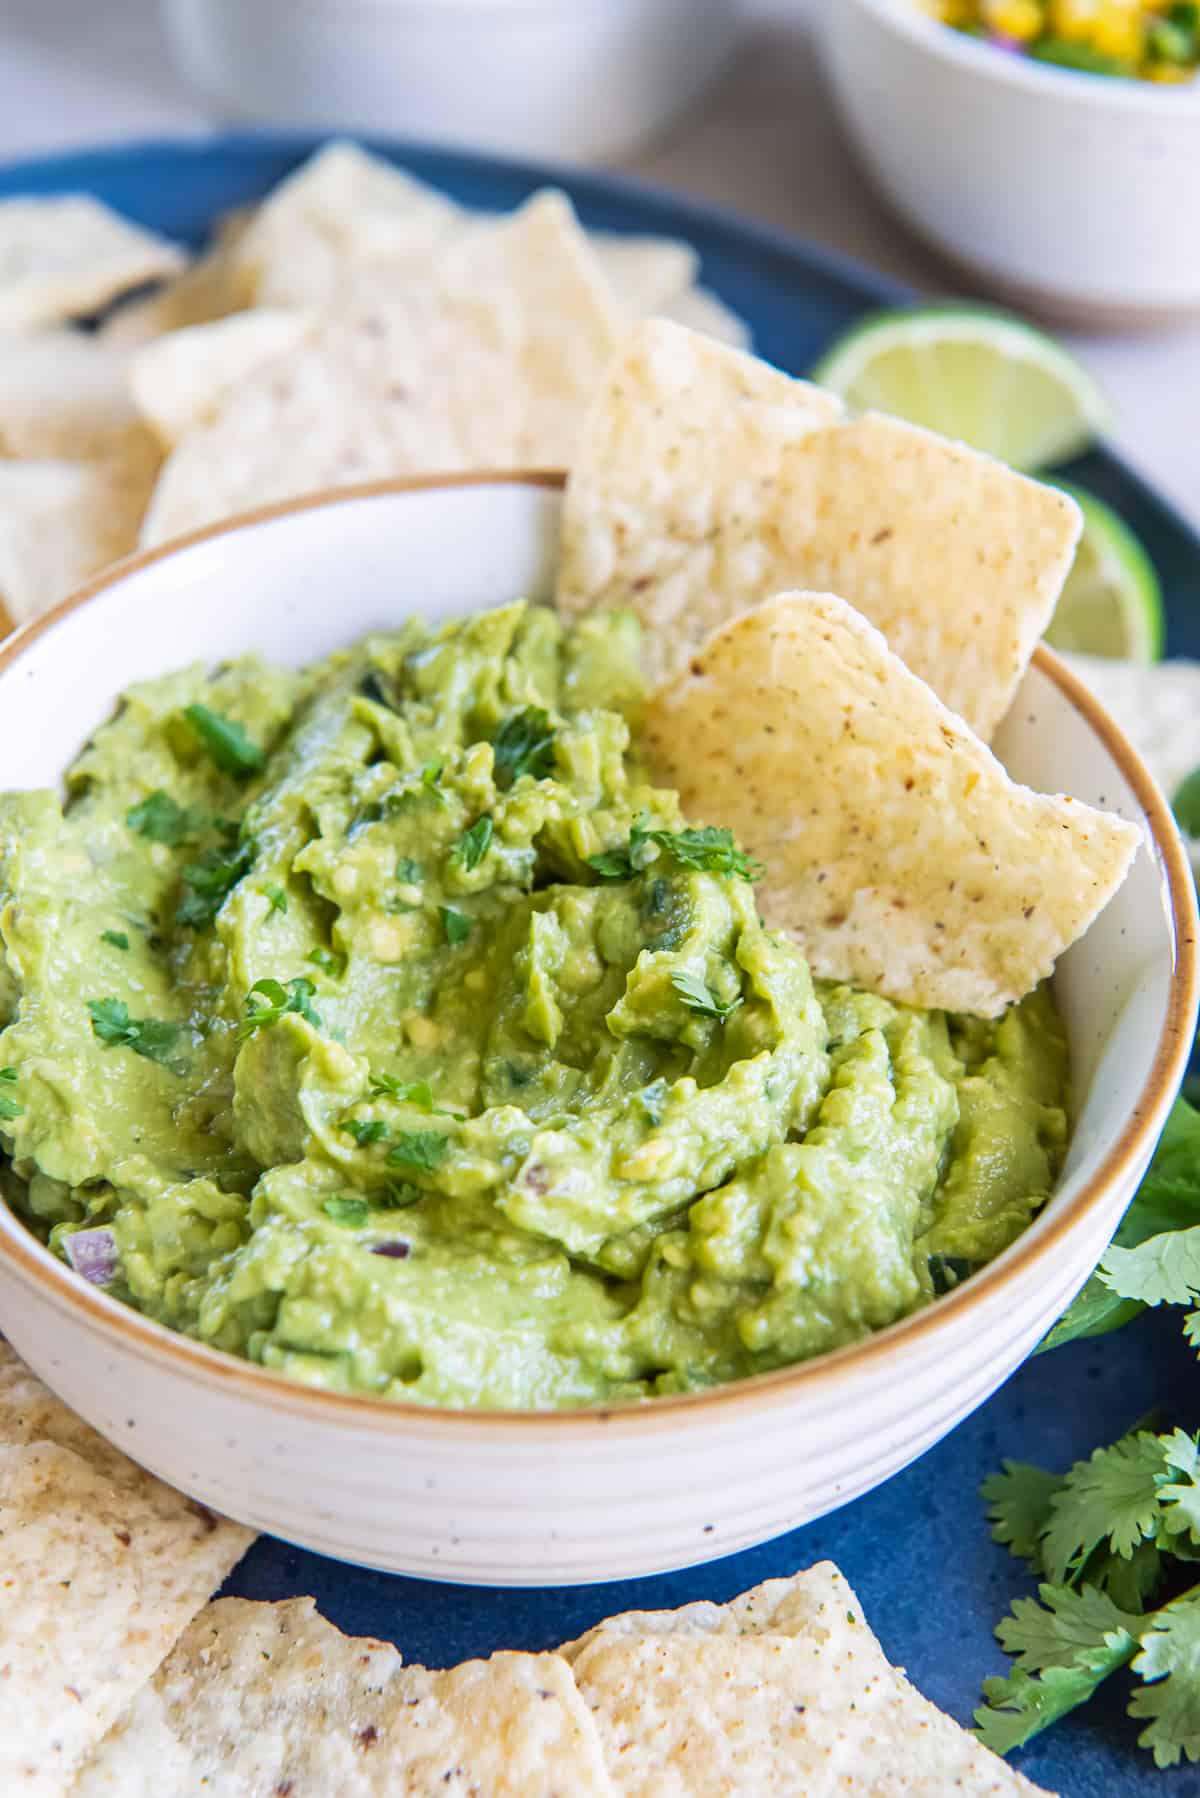 Two tortilla chips pressed into guacamole in a white bowl.